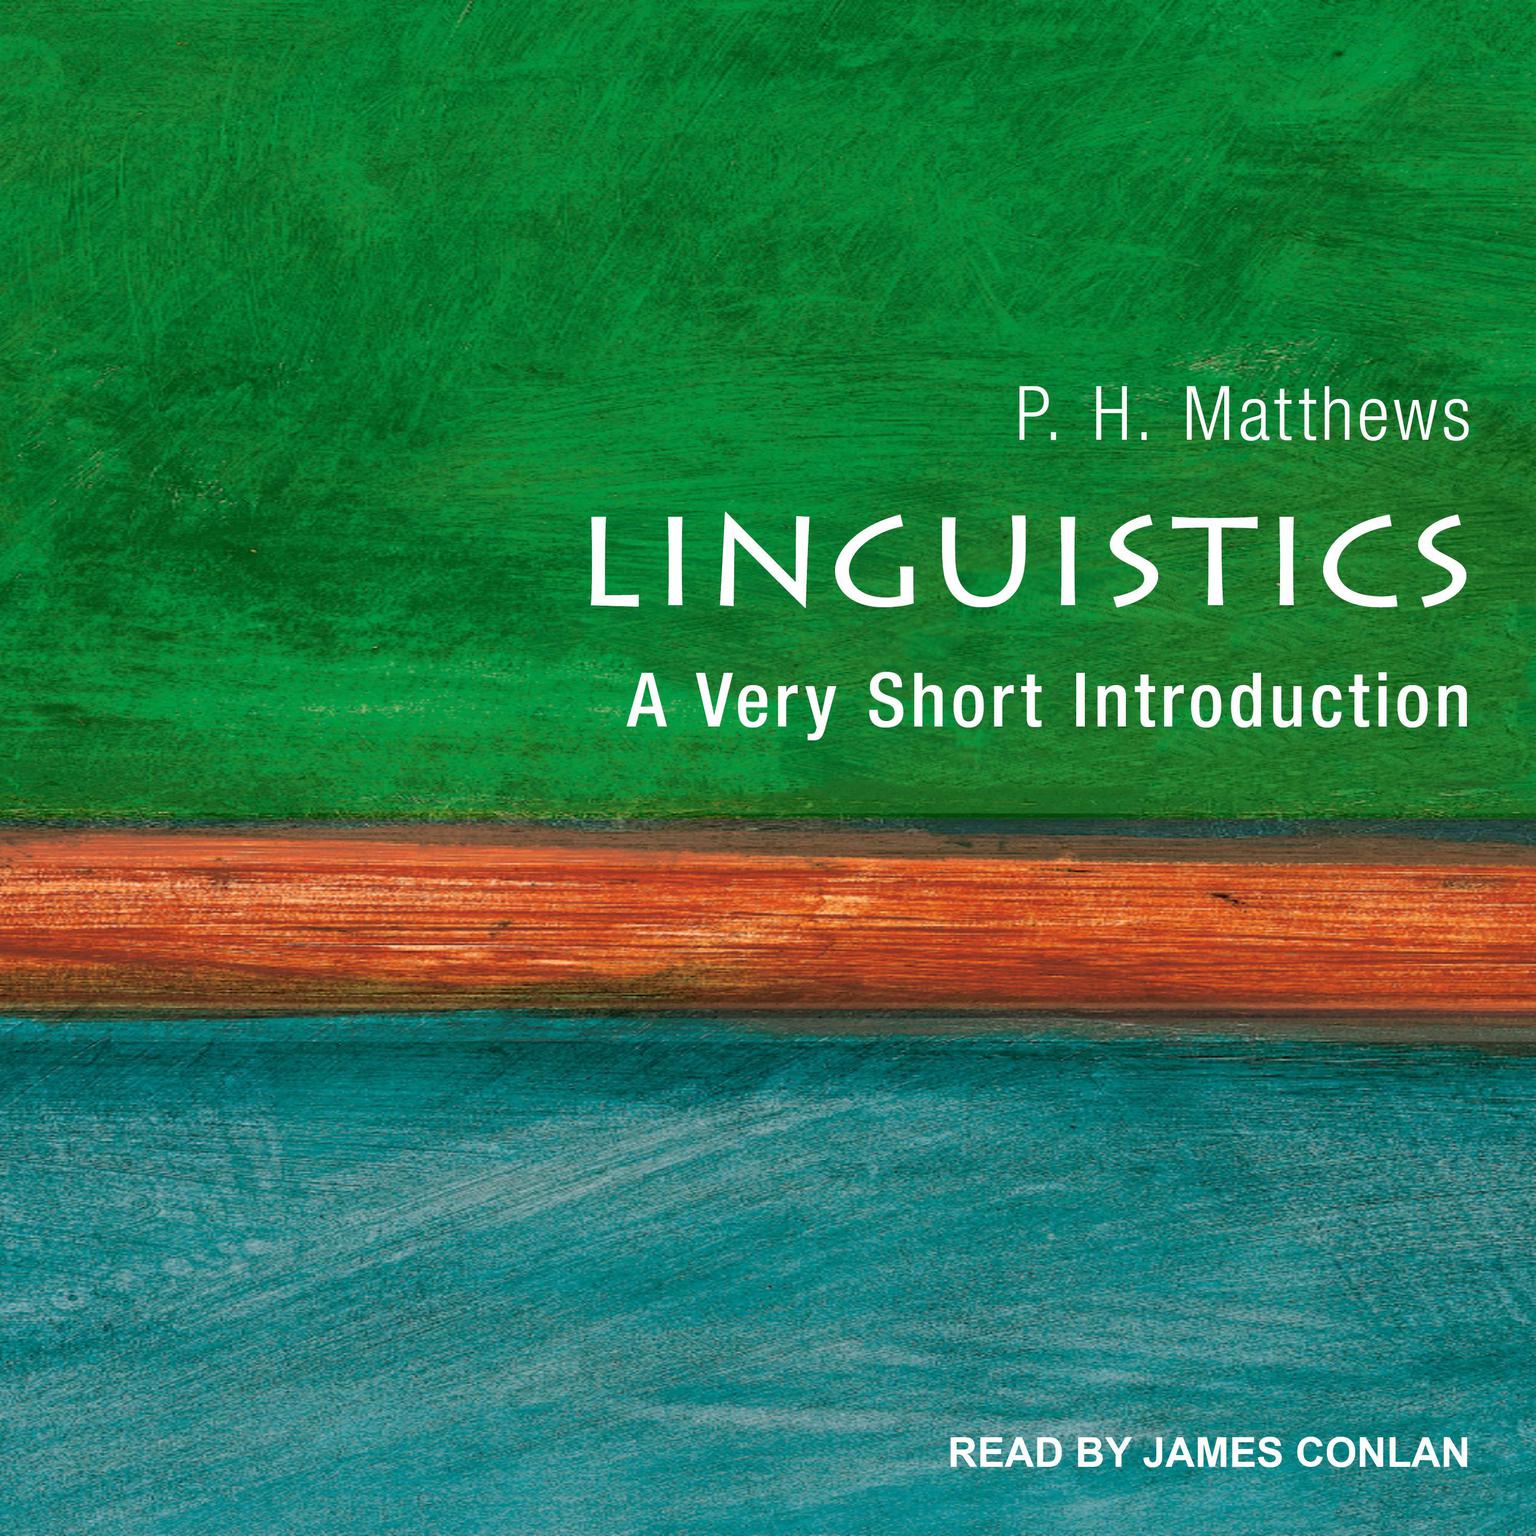 Linguistics: A Very Short Introduction Audiobook, by P.H. Matthews